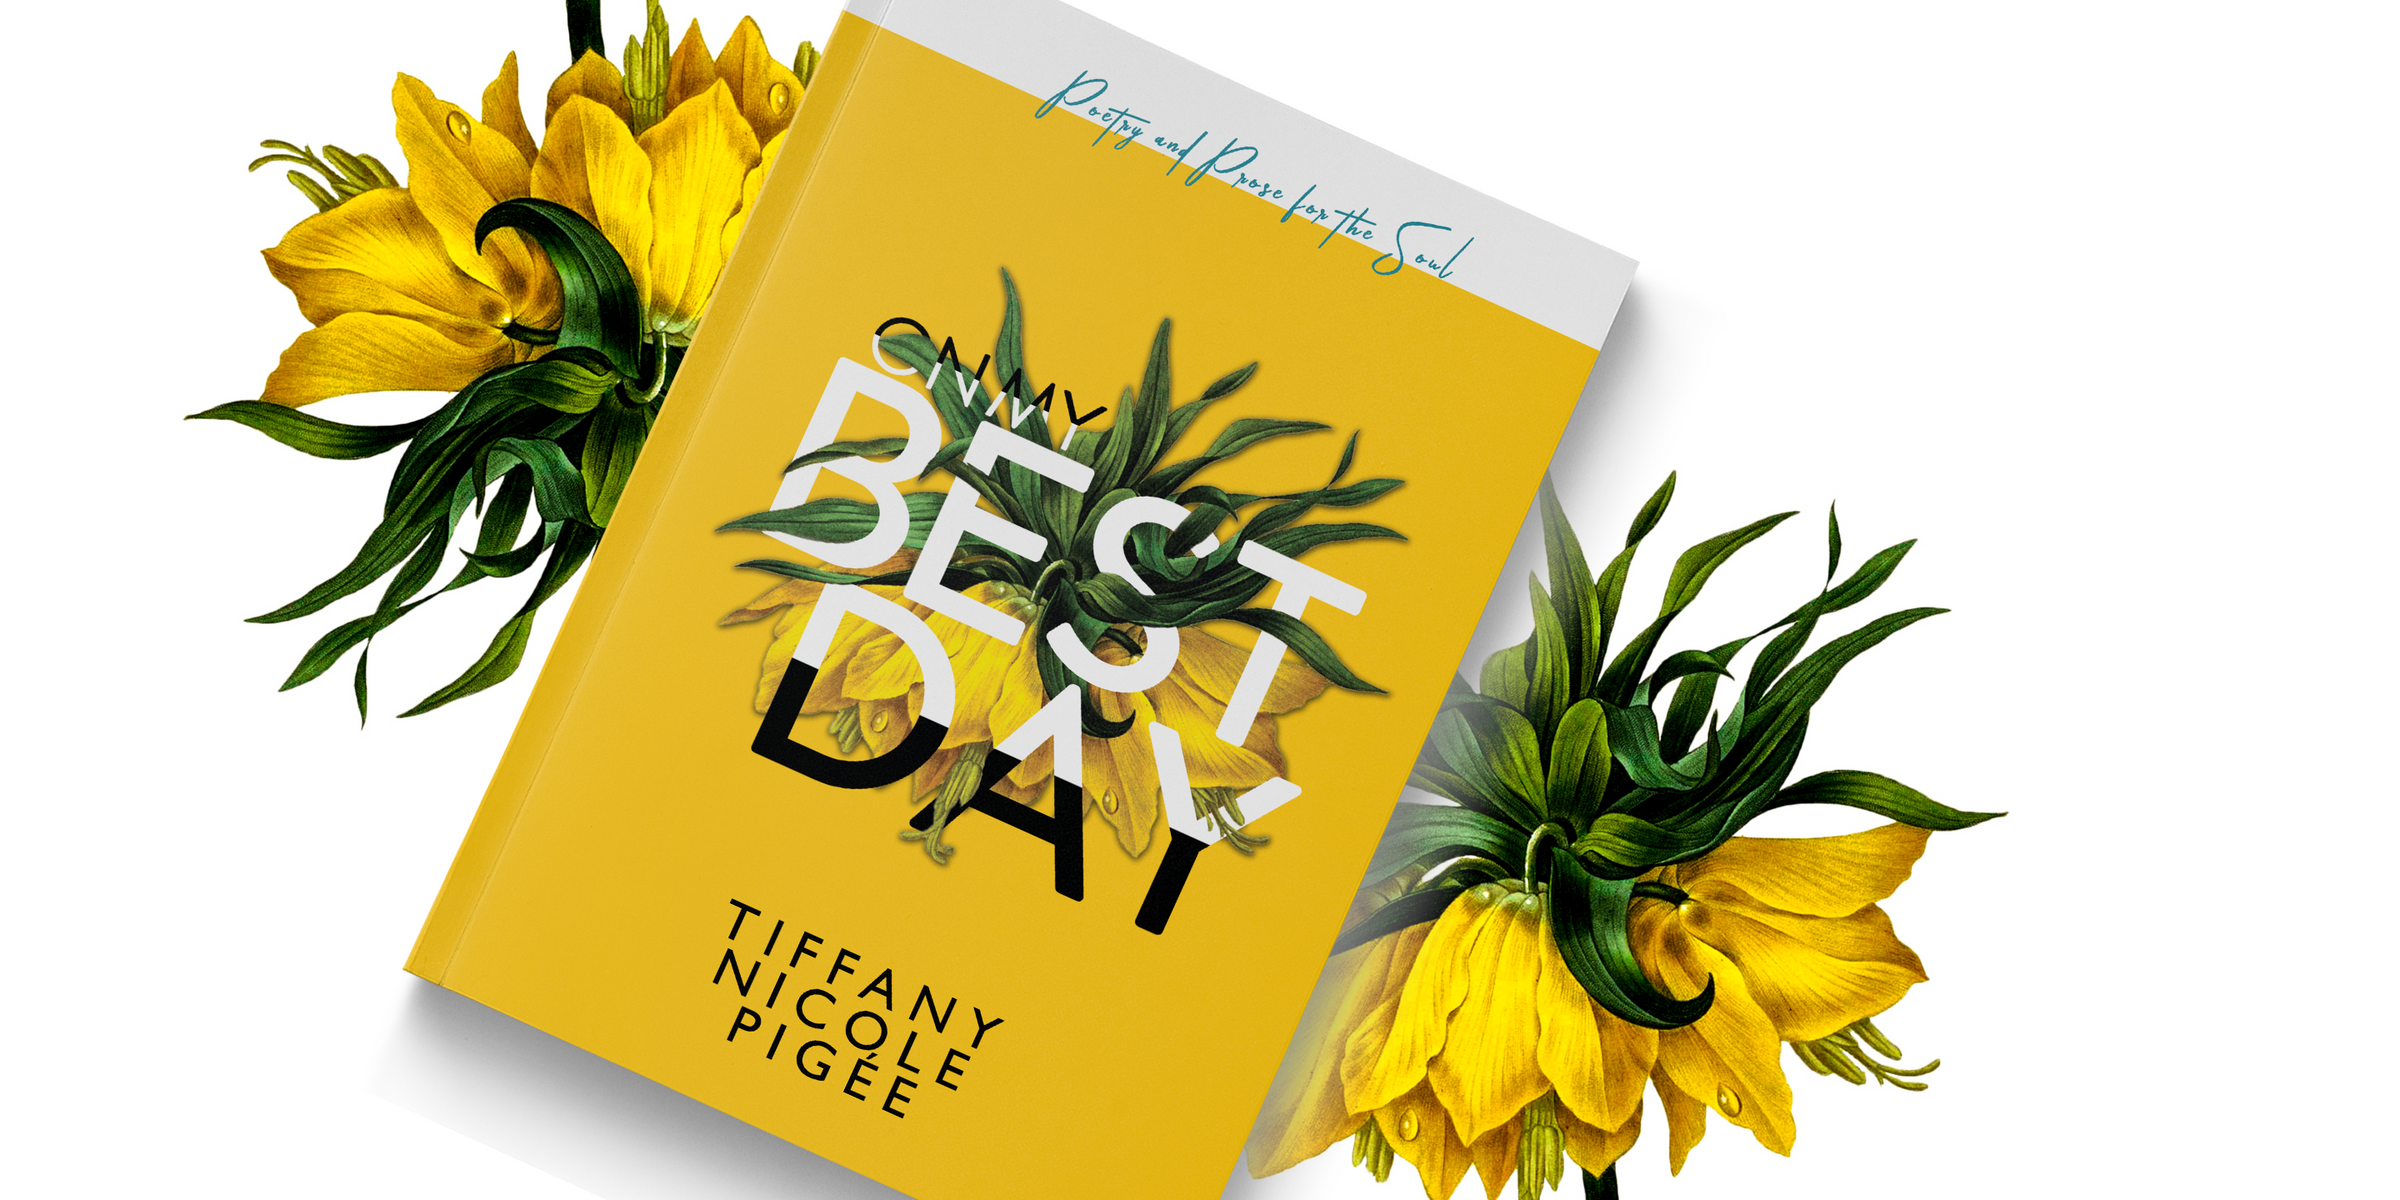 On My Best Day Paperback poetry book